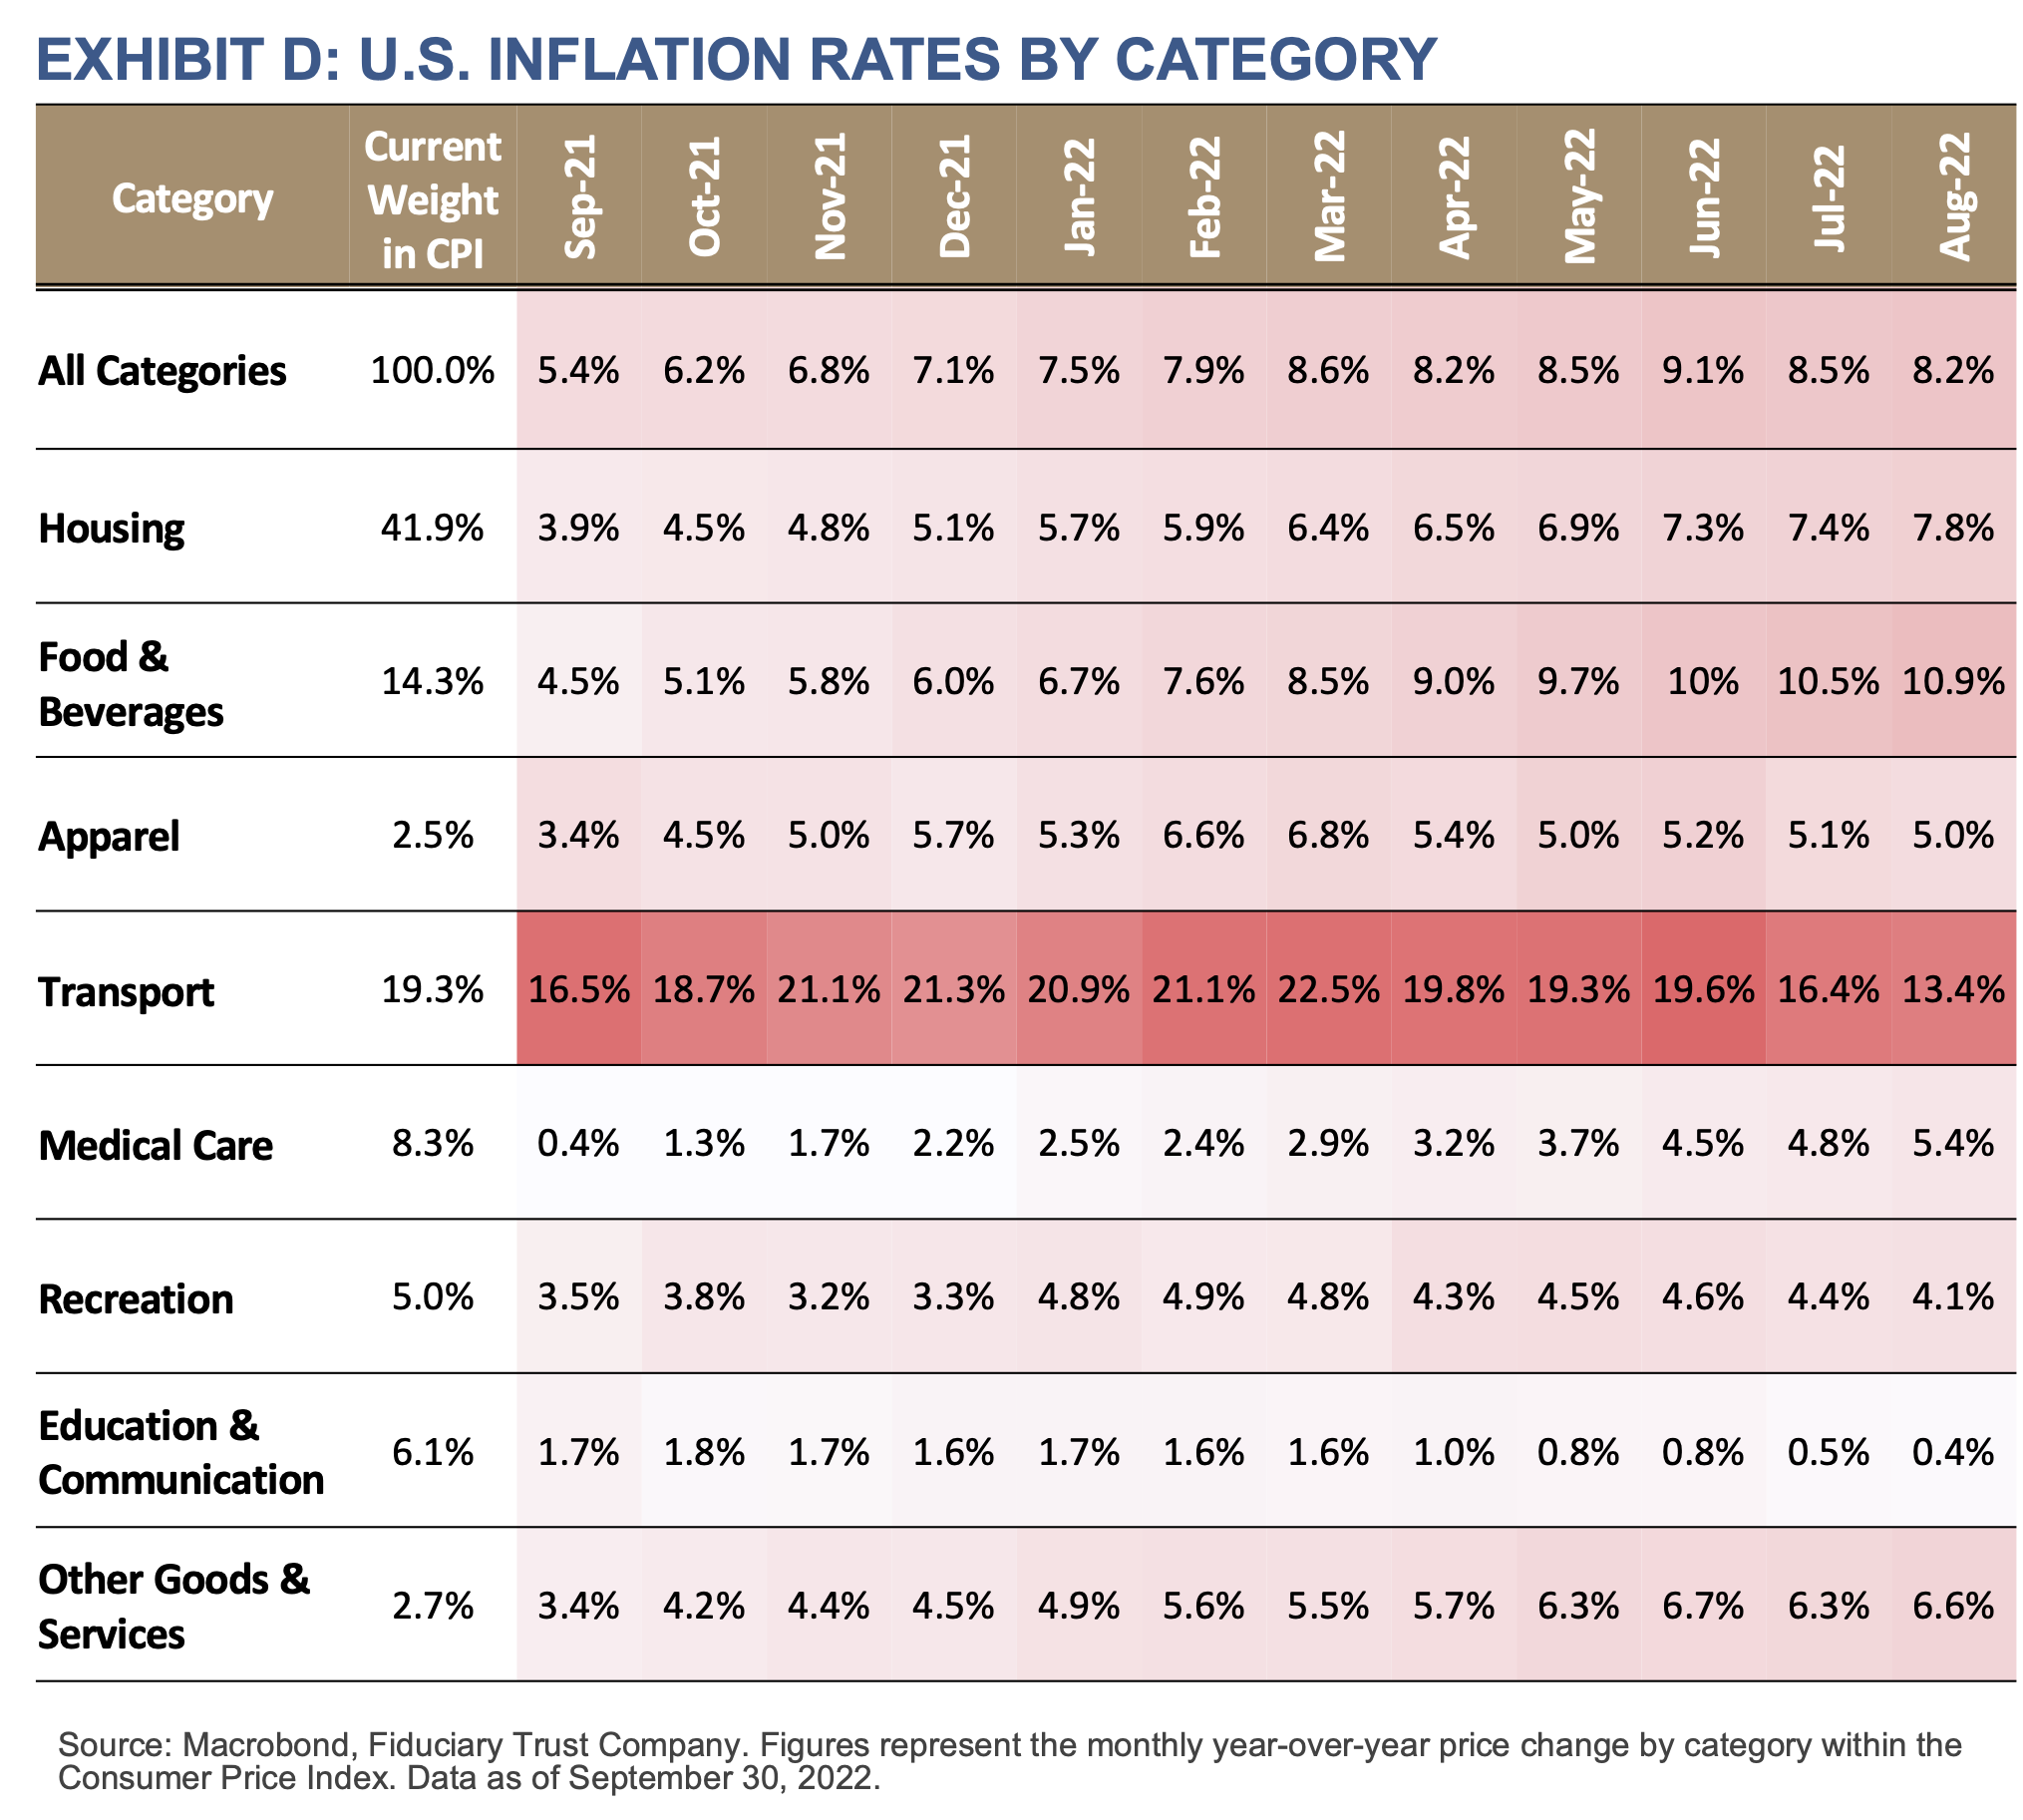 Exhibit D-Inflation Rates by Category